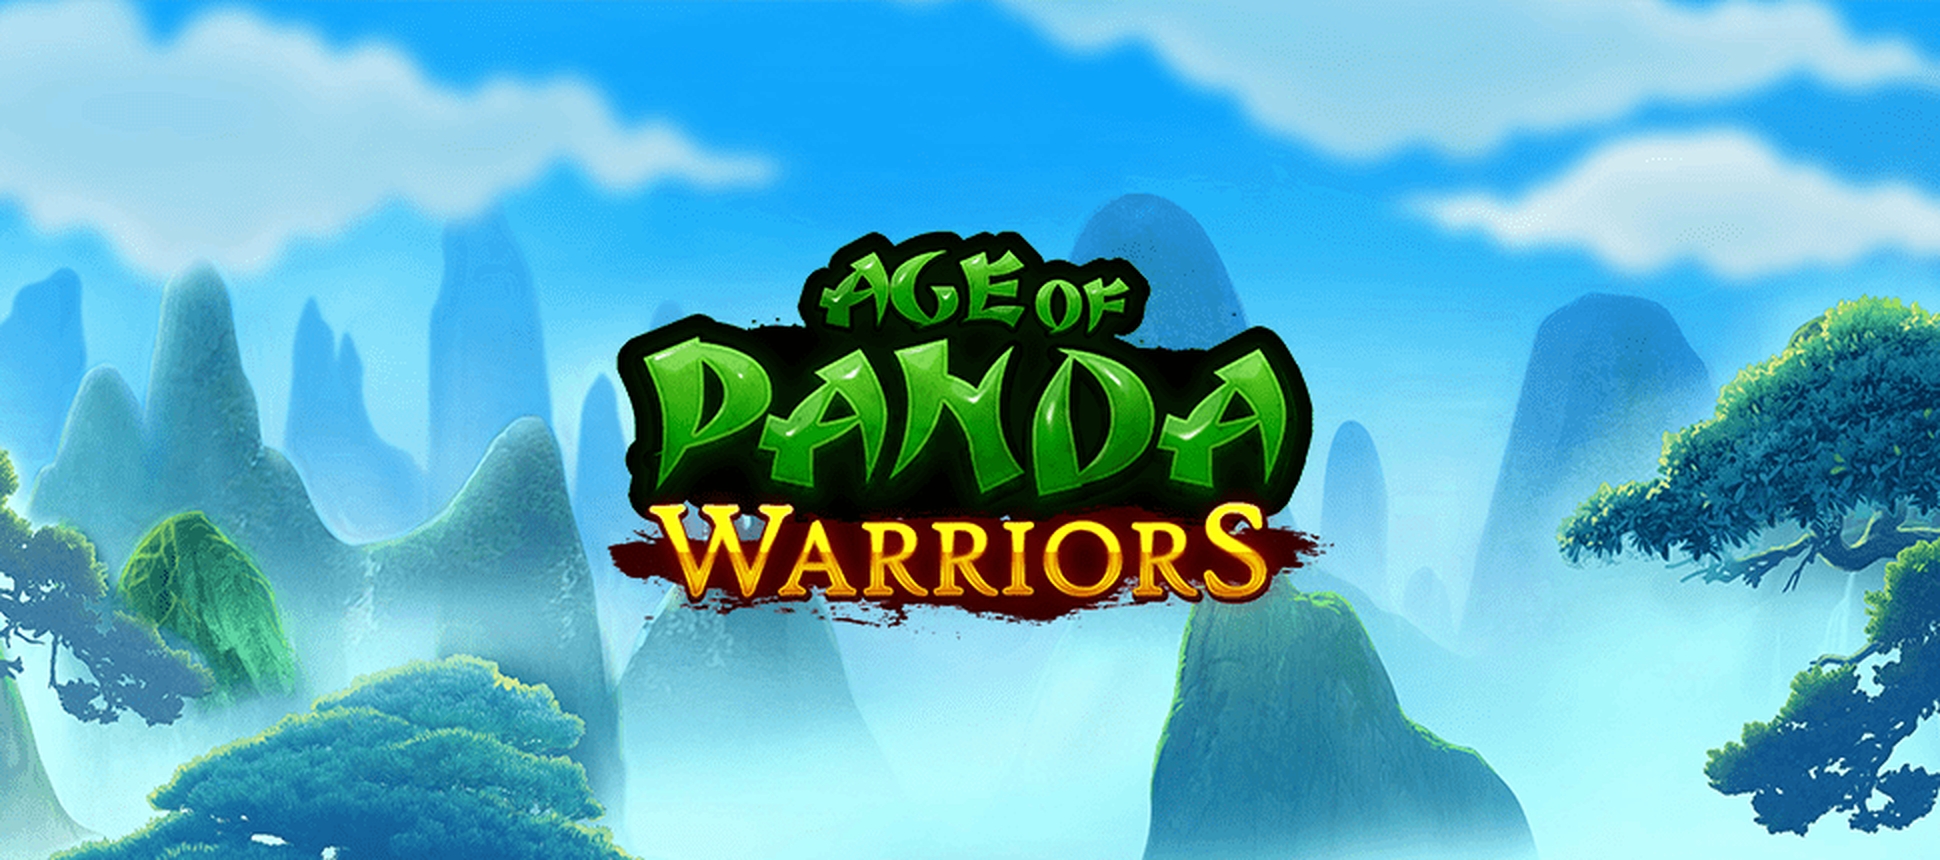 The Age of Panda Warriors Online Slot Demo Game by ReelFeel Gaming